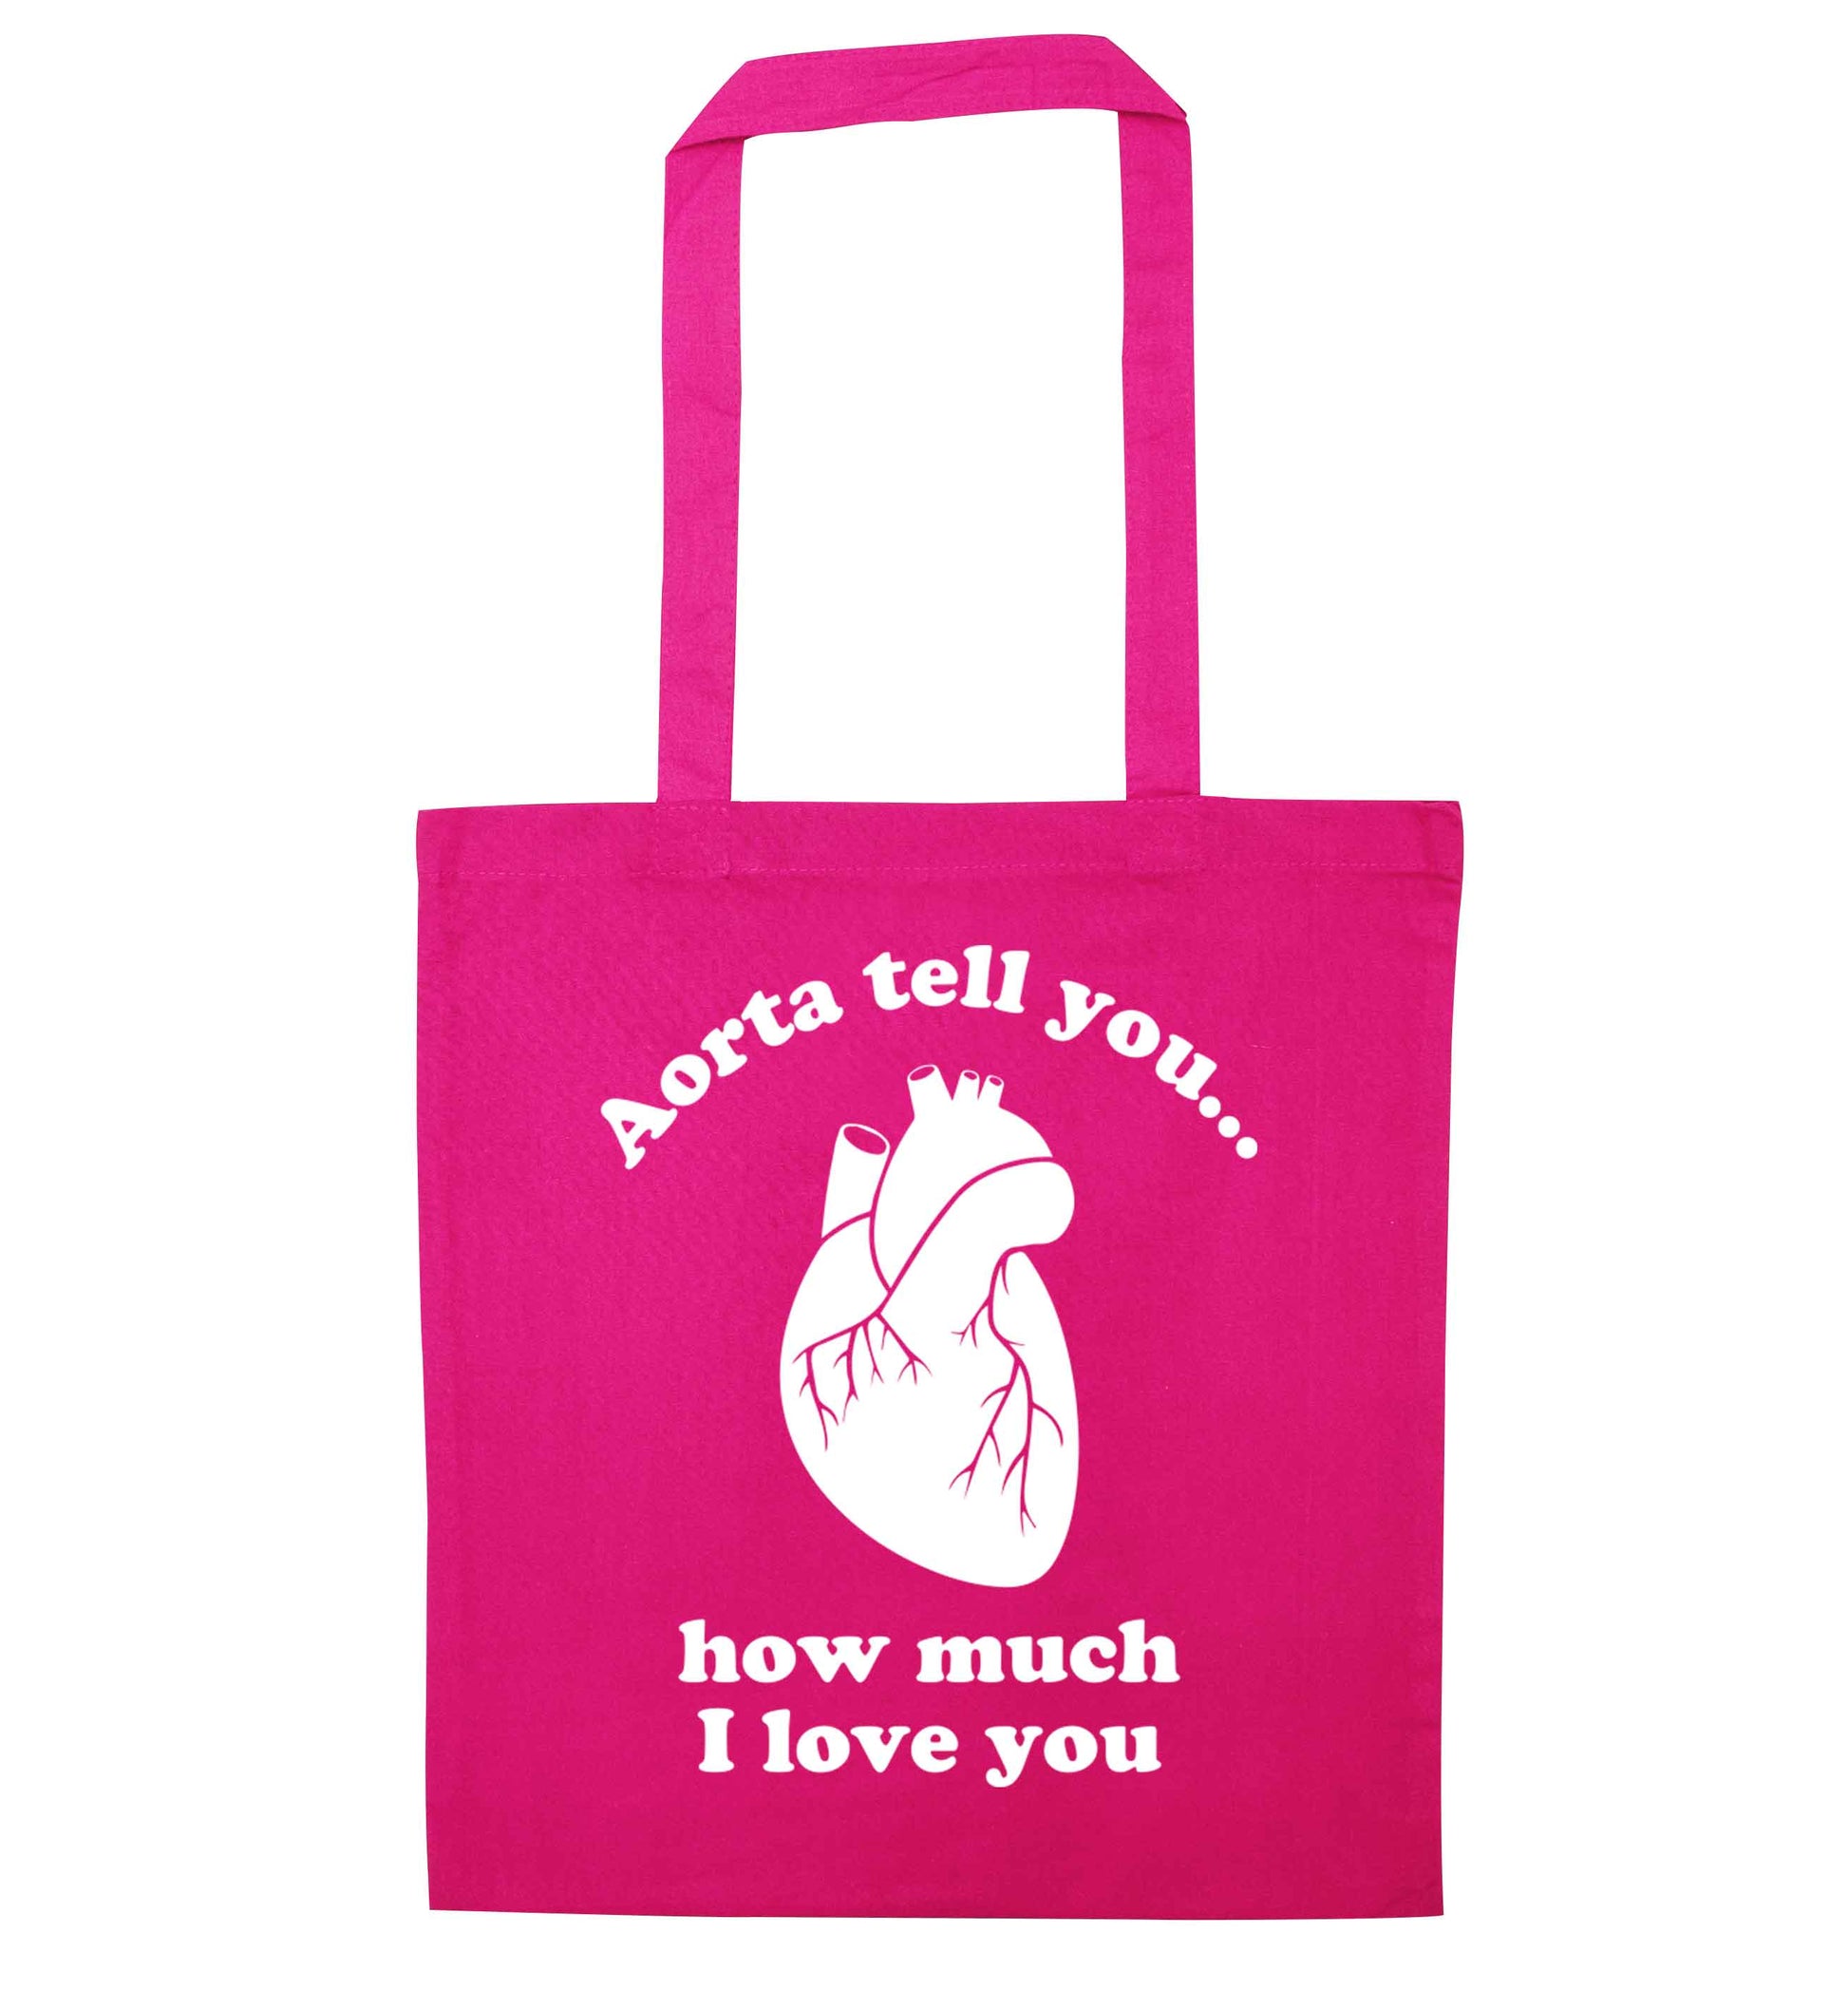 Aorta tell you how much I love you pink tote bag